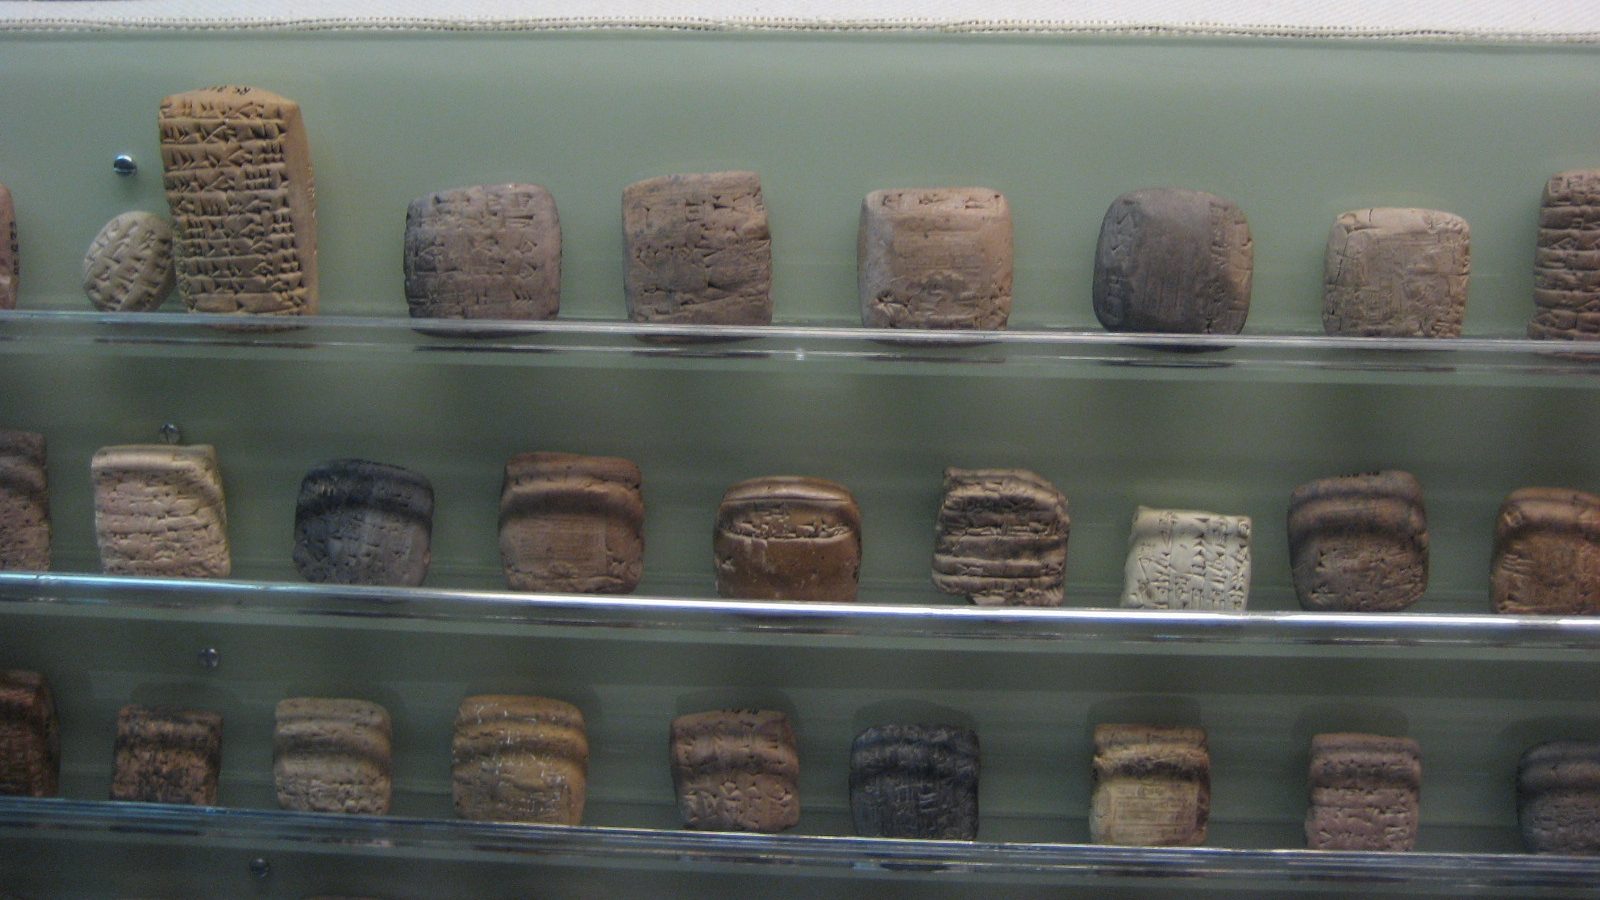 A display case with a lot of different cuneiform tablets.